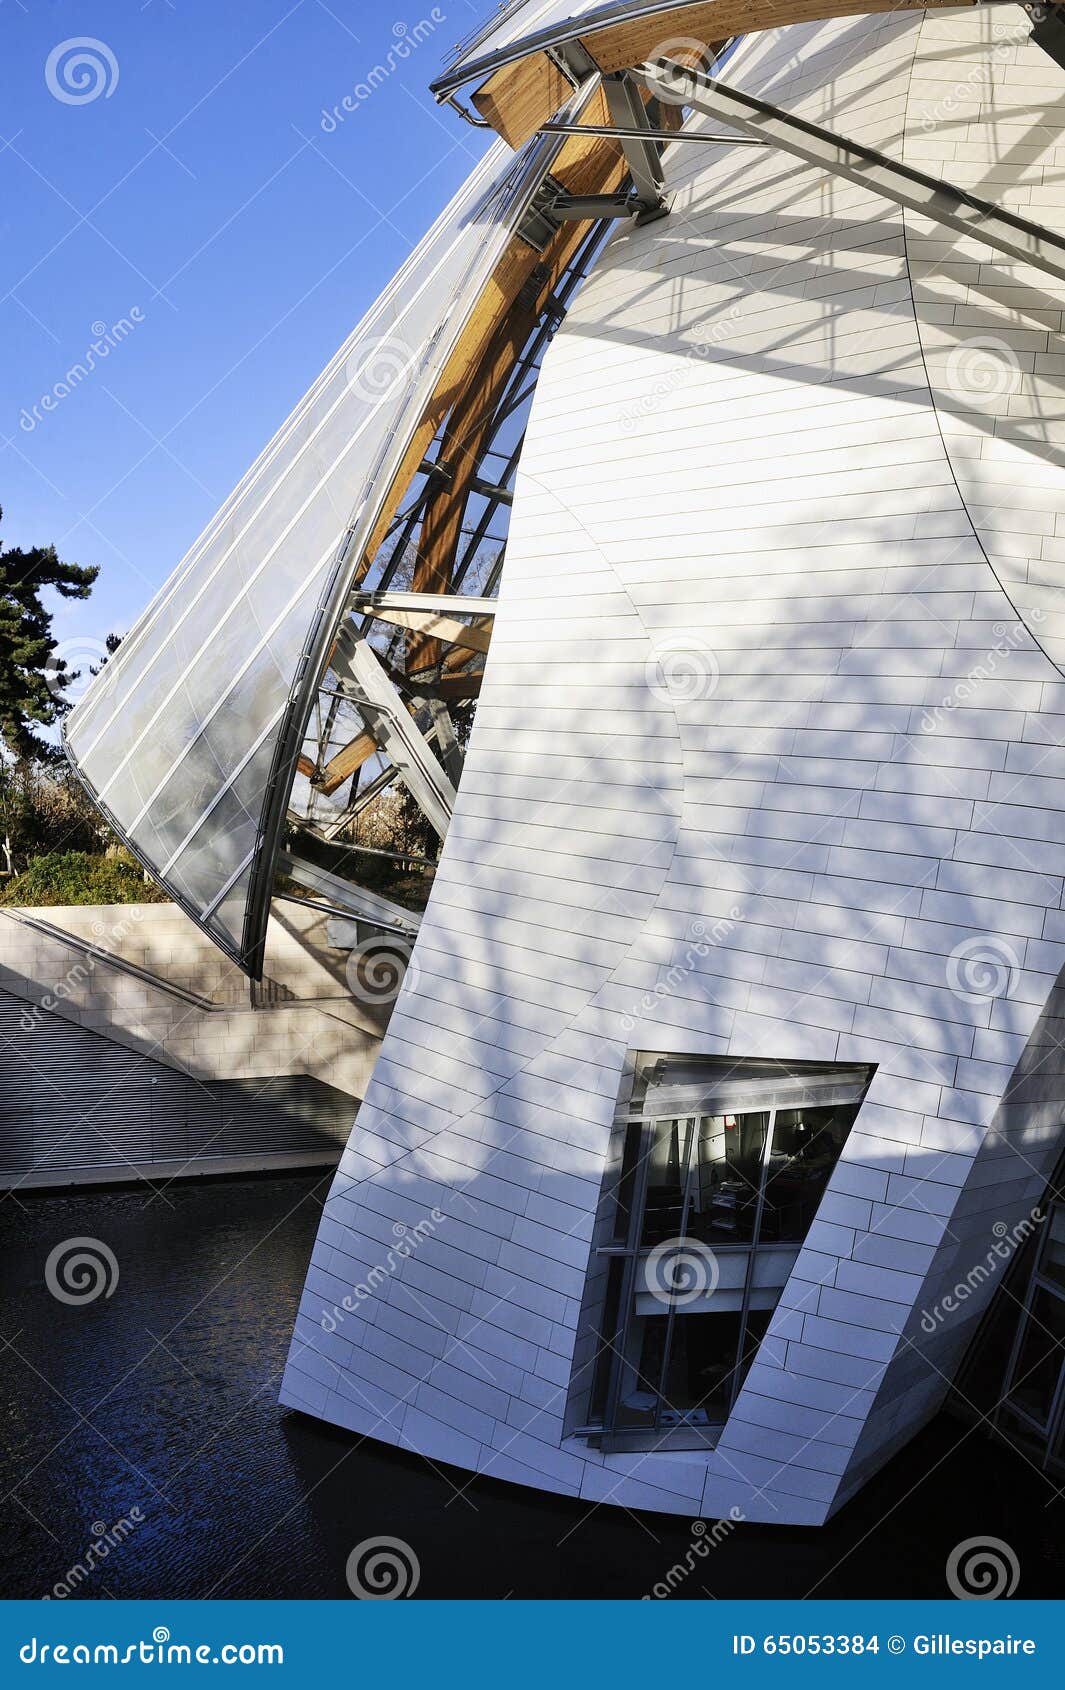 Museum Of Contemporary Art Of The Louis Vuitton Foundation Editorial Stock Image - Image of logo ...